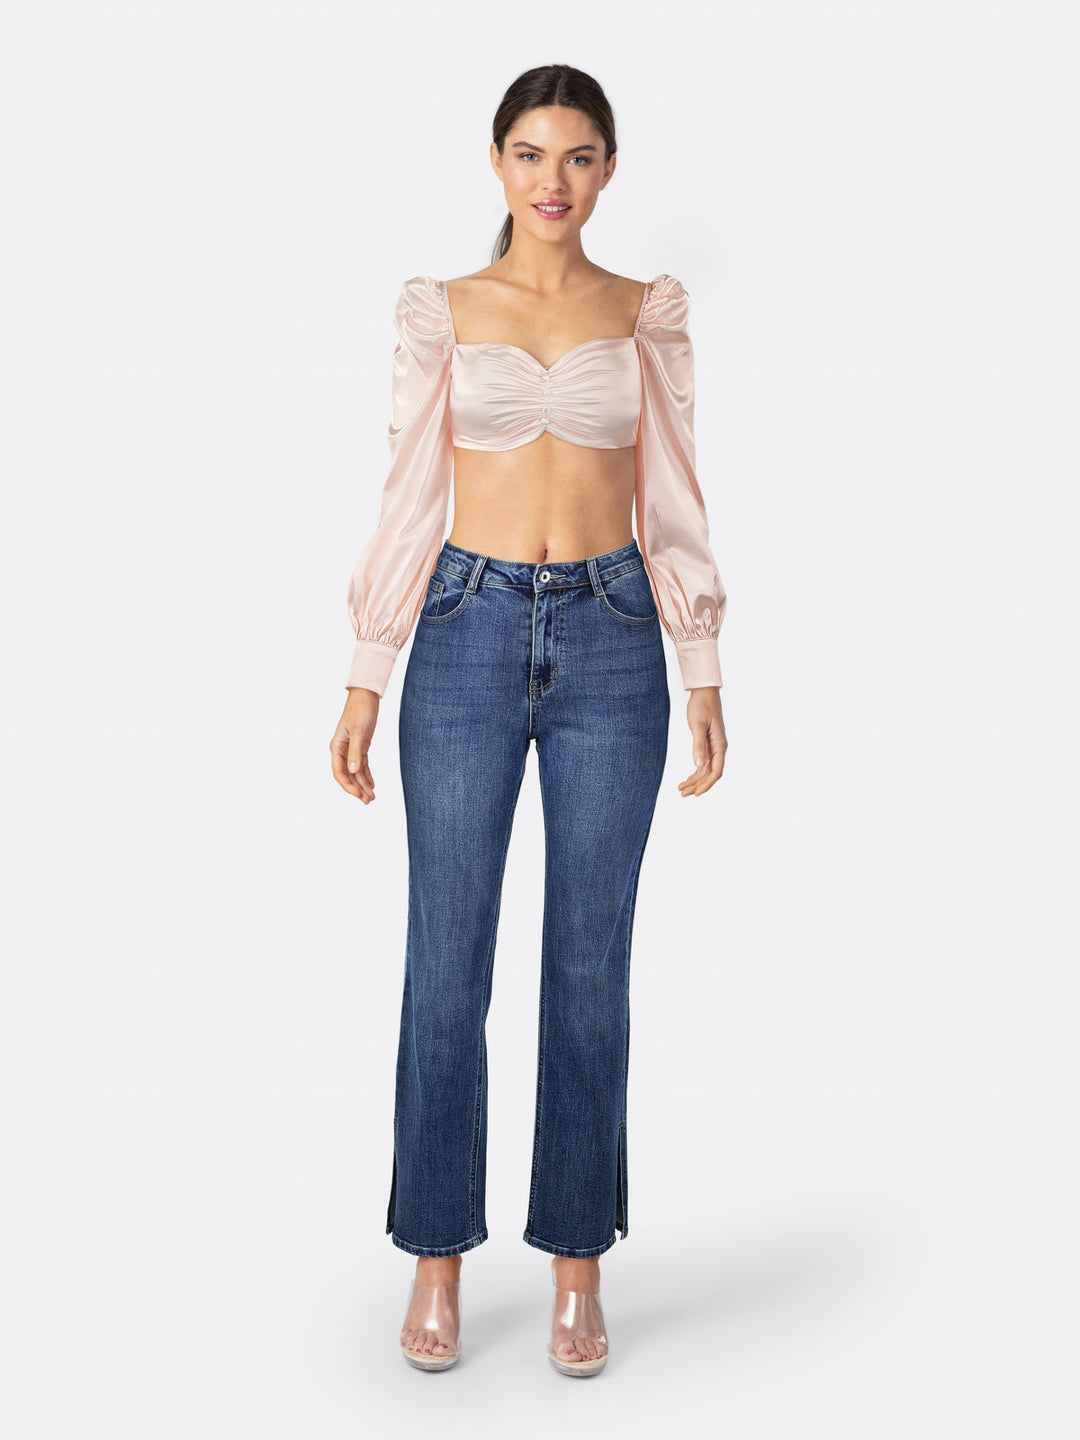 Satin Long Sleeve Crop Top with Buttons Details Pink Front